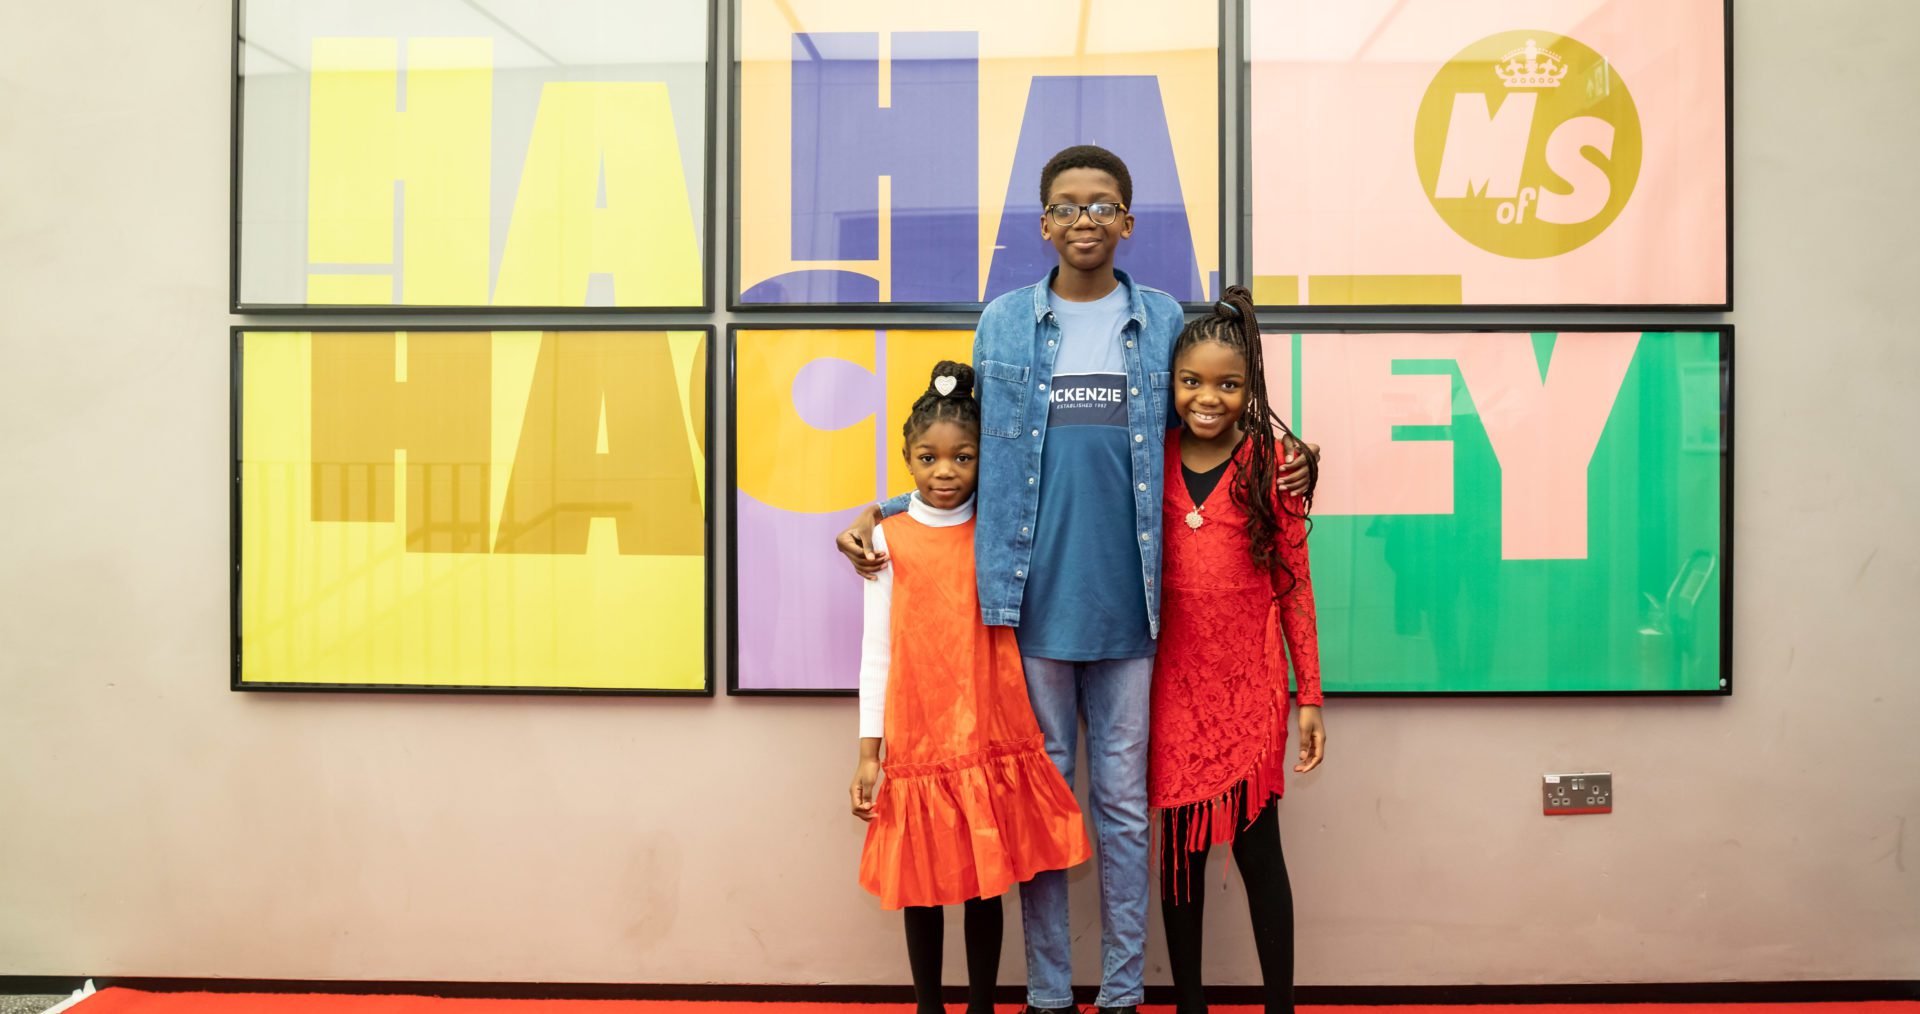 Three young people, dressed in bright clothing, stand smiling, arms around each other, in front of a large cinema poster that reads Ha Ha Hackney with the Ministry of Stories logo